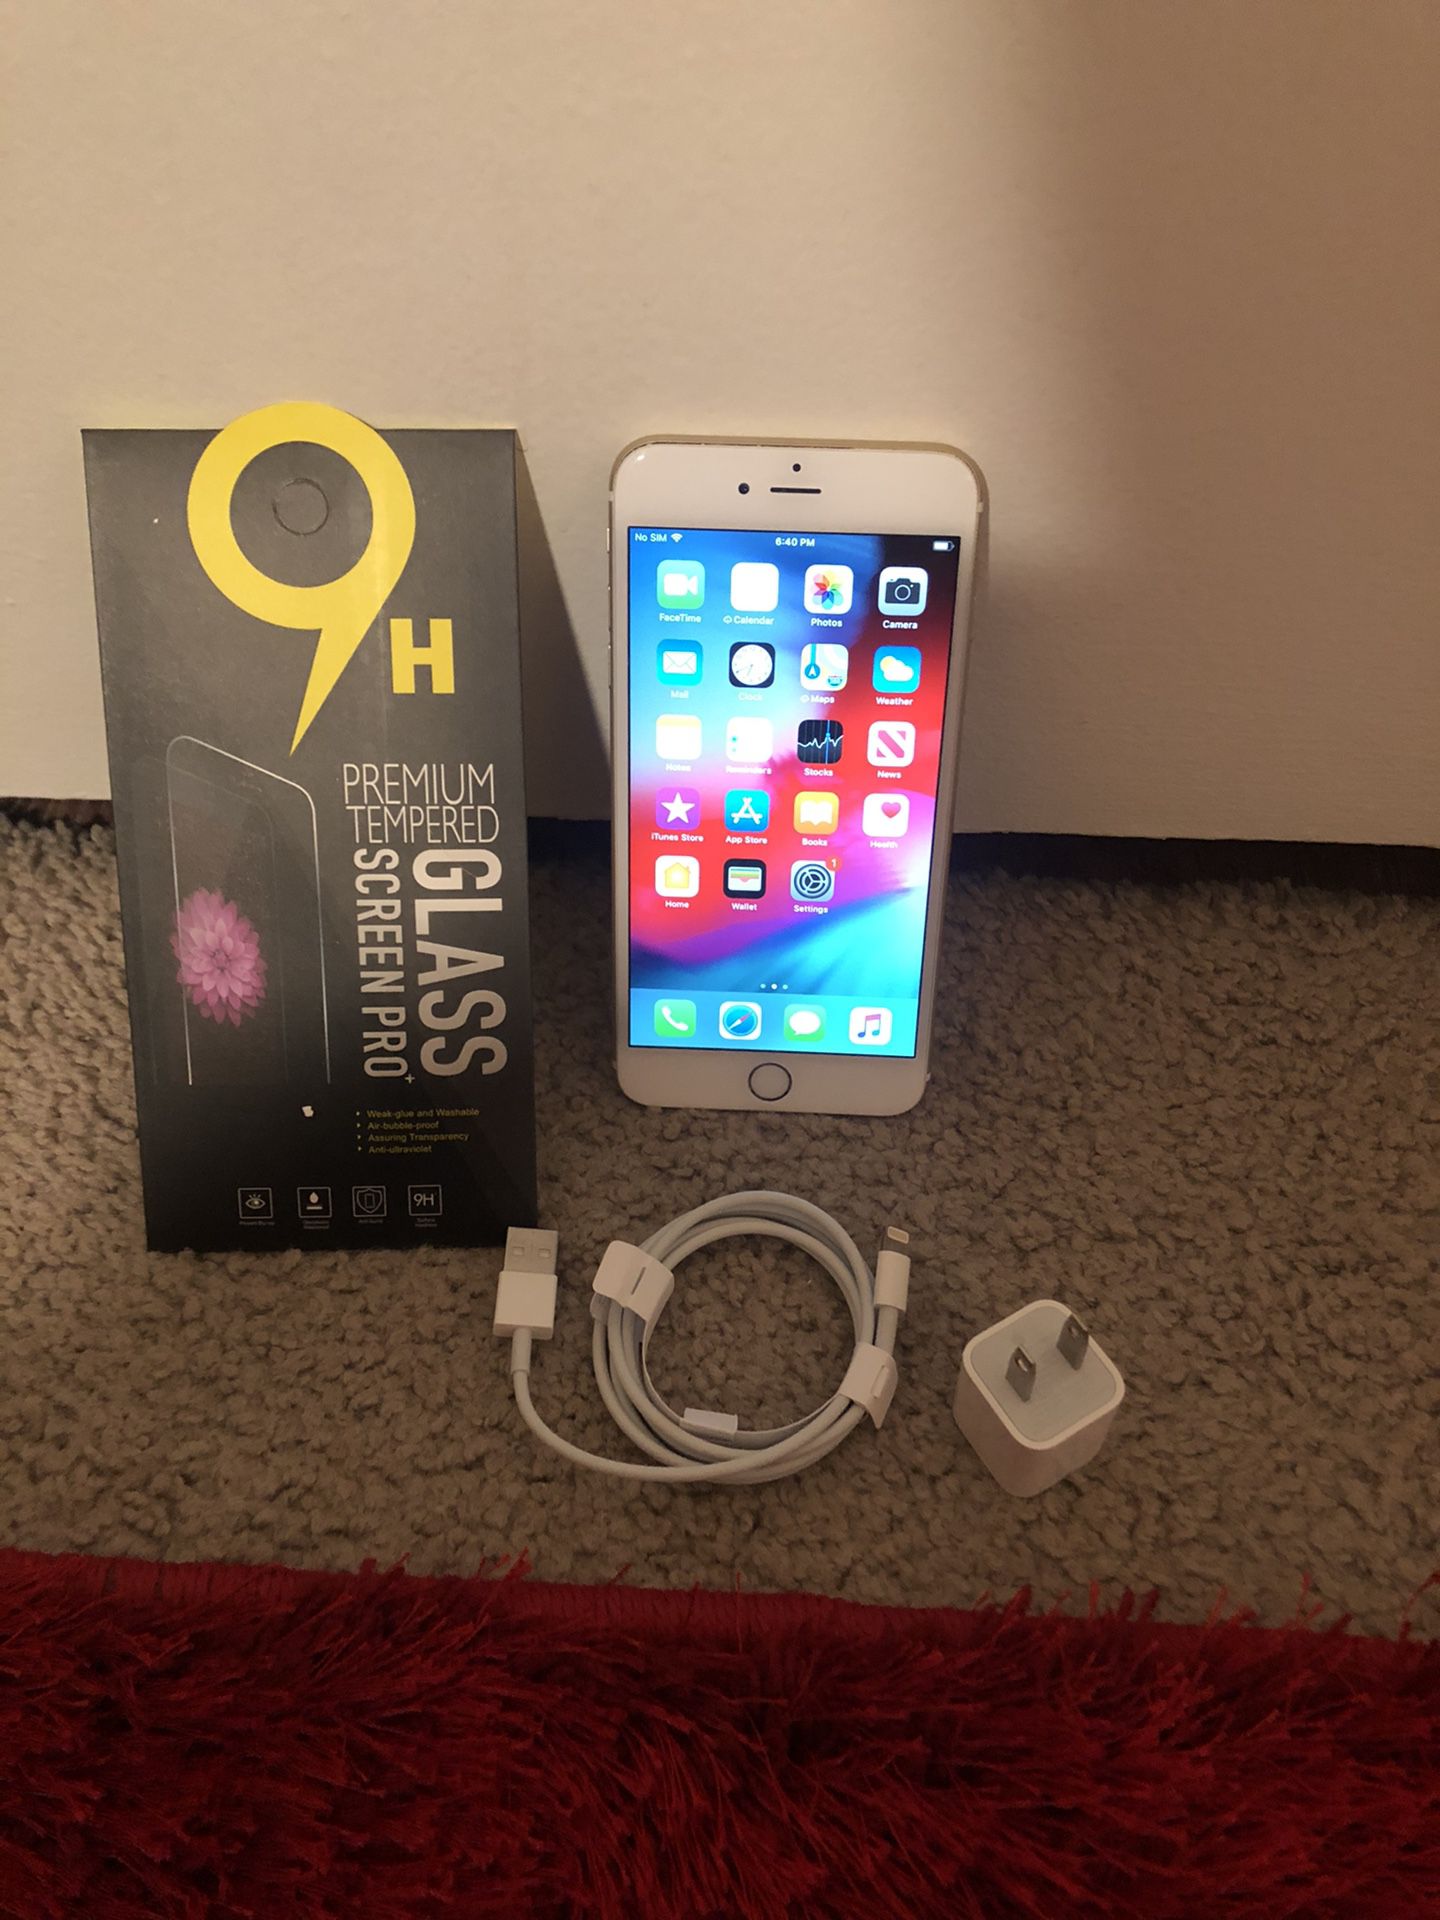 iPhone 6 Plus 16 GB unlocked in excellent condition can be used with any carrier